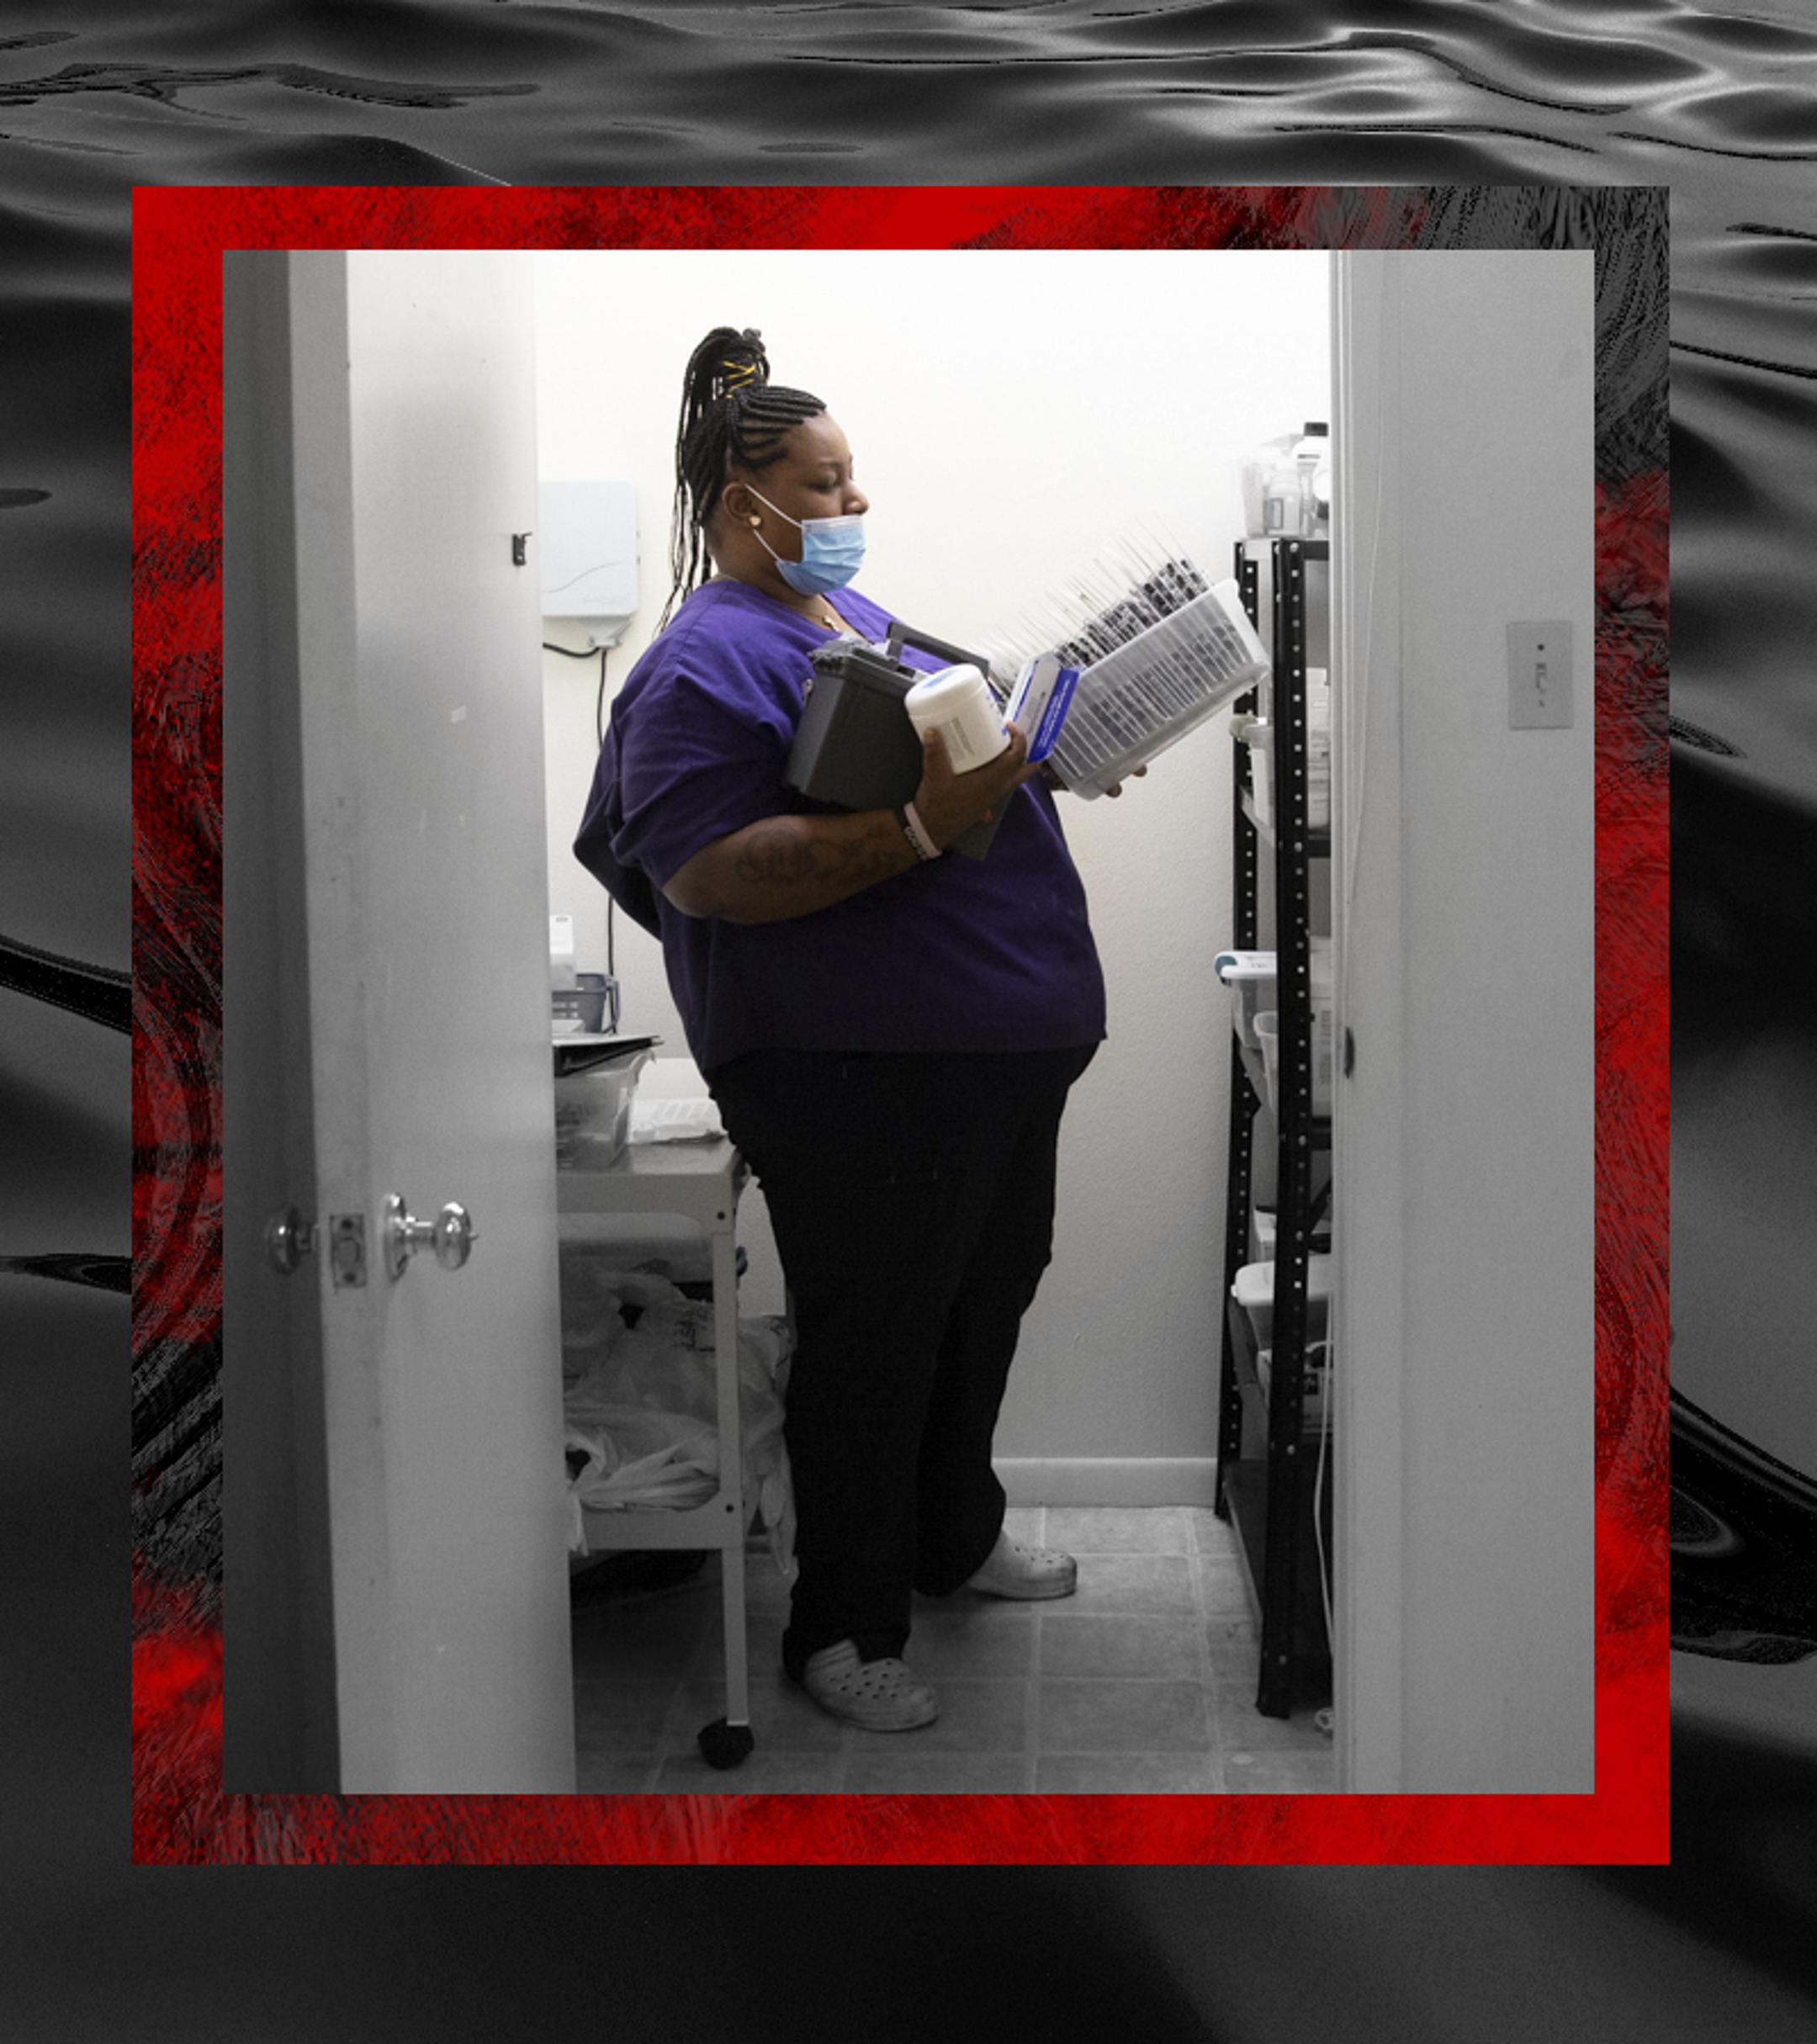 Tre'Asia Anderson gets her clients' medication out of hte locked closet where it is kept; her arms are full. The camera captures her from a doorway. The photo is desaturated except for Tre'Asia. A square of dark and red water border the photograph.